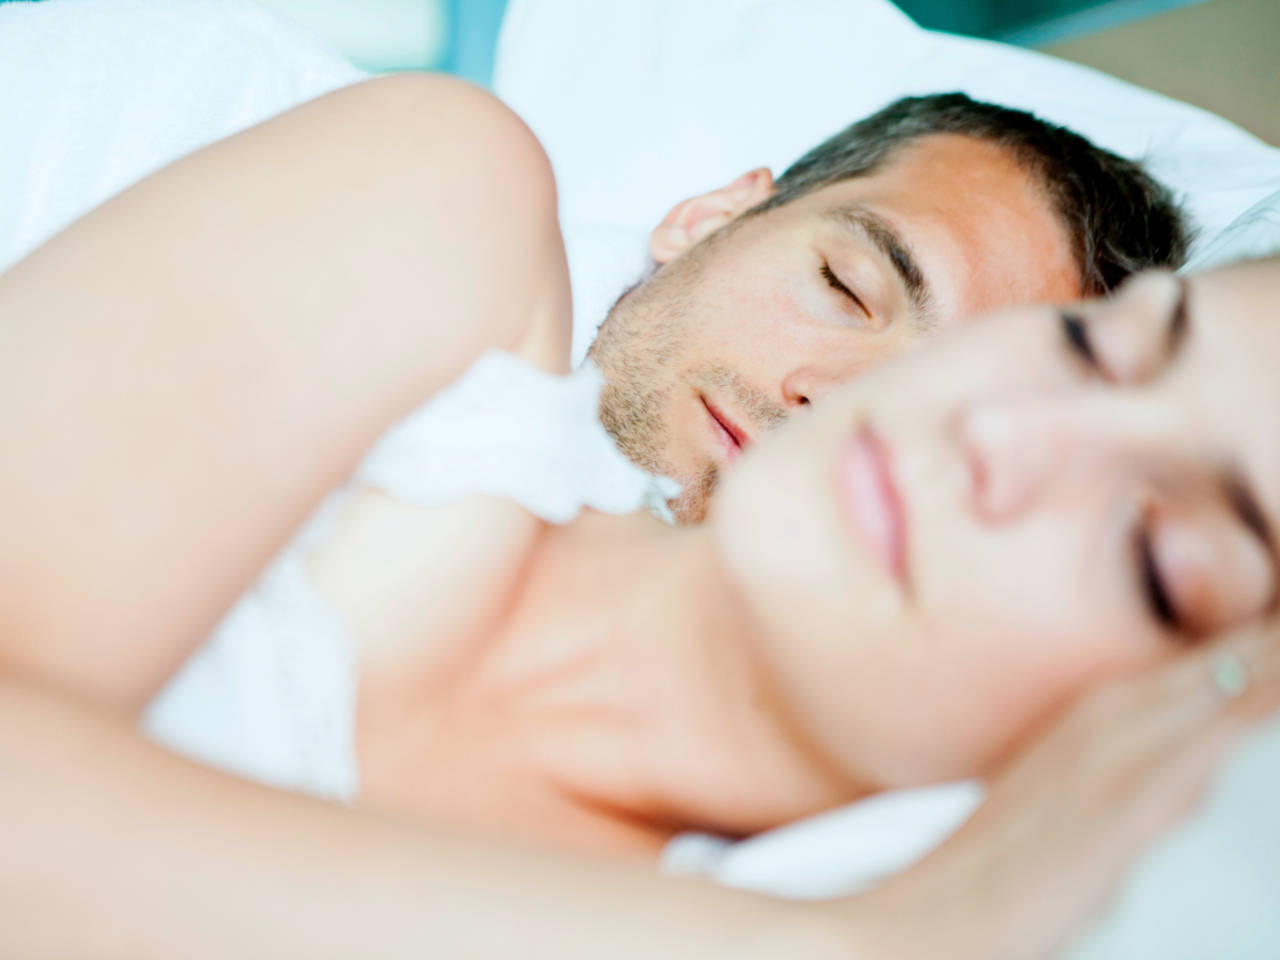 Heres what cheating dreams can actually mean